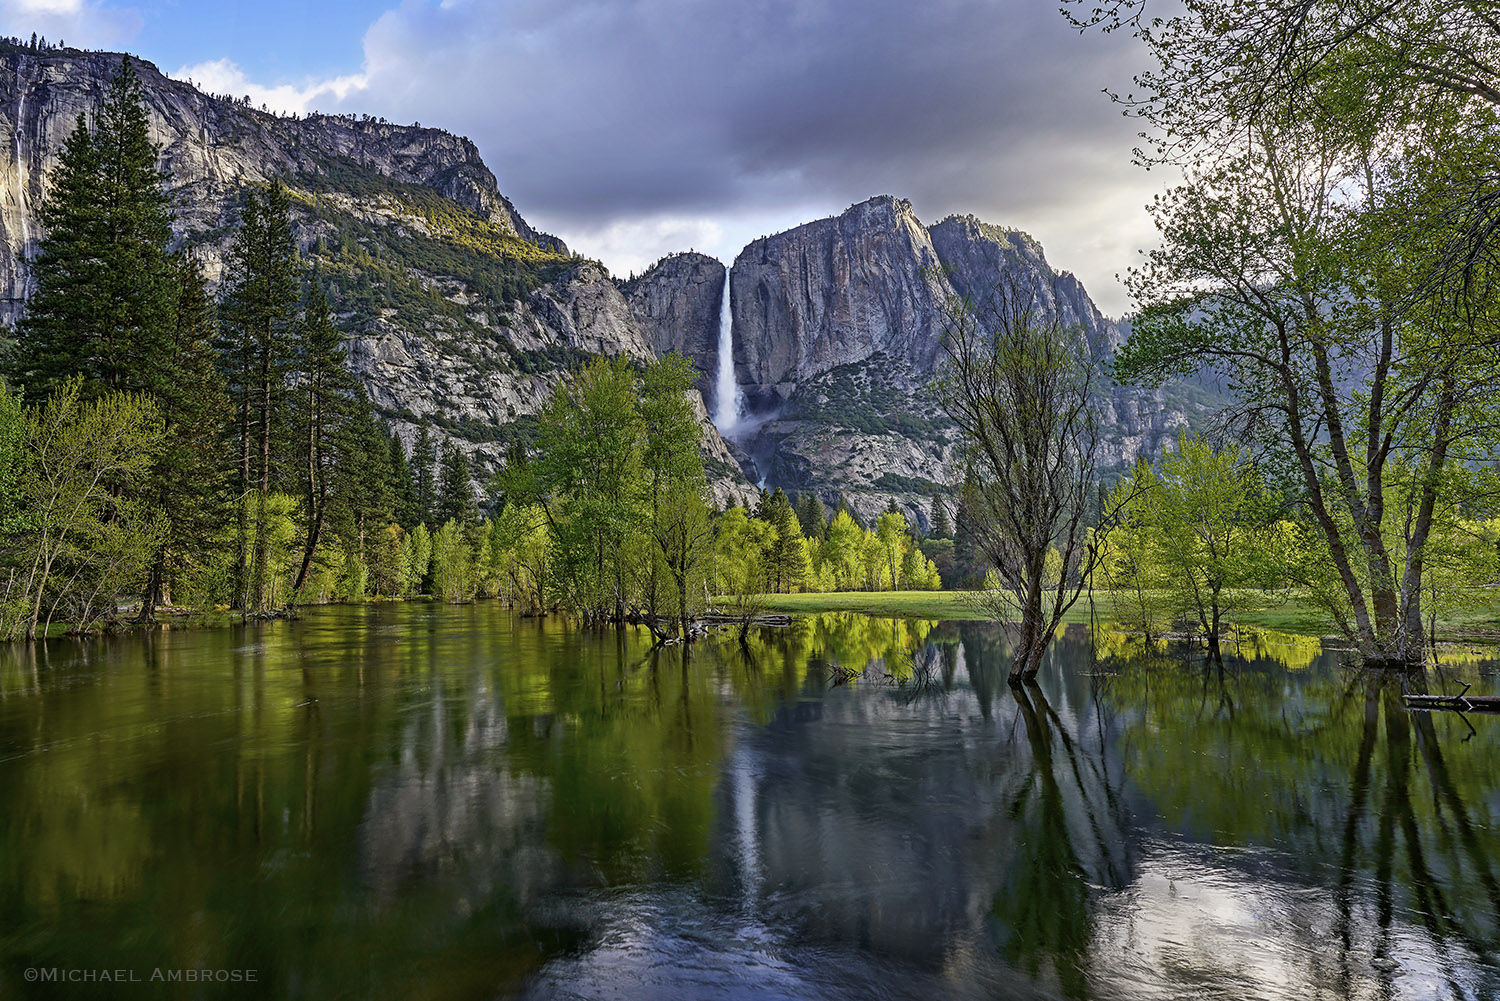 Reflections of Yosemite Falls crashing into the Merced River in Yosemite National Park in the Spring.